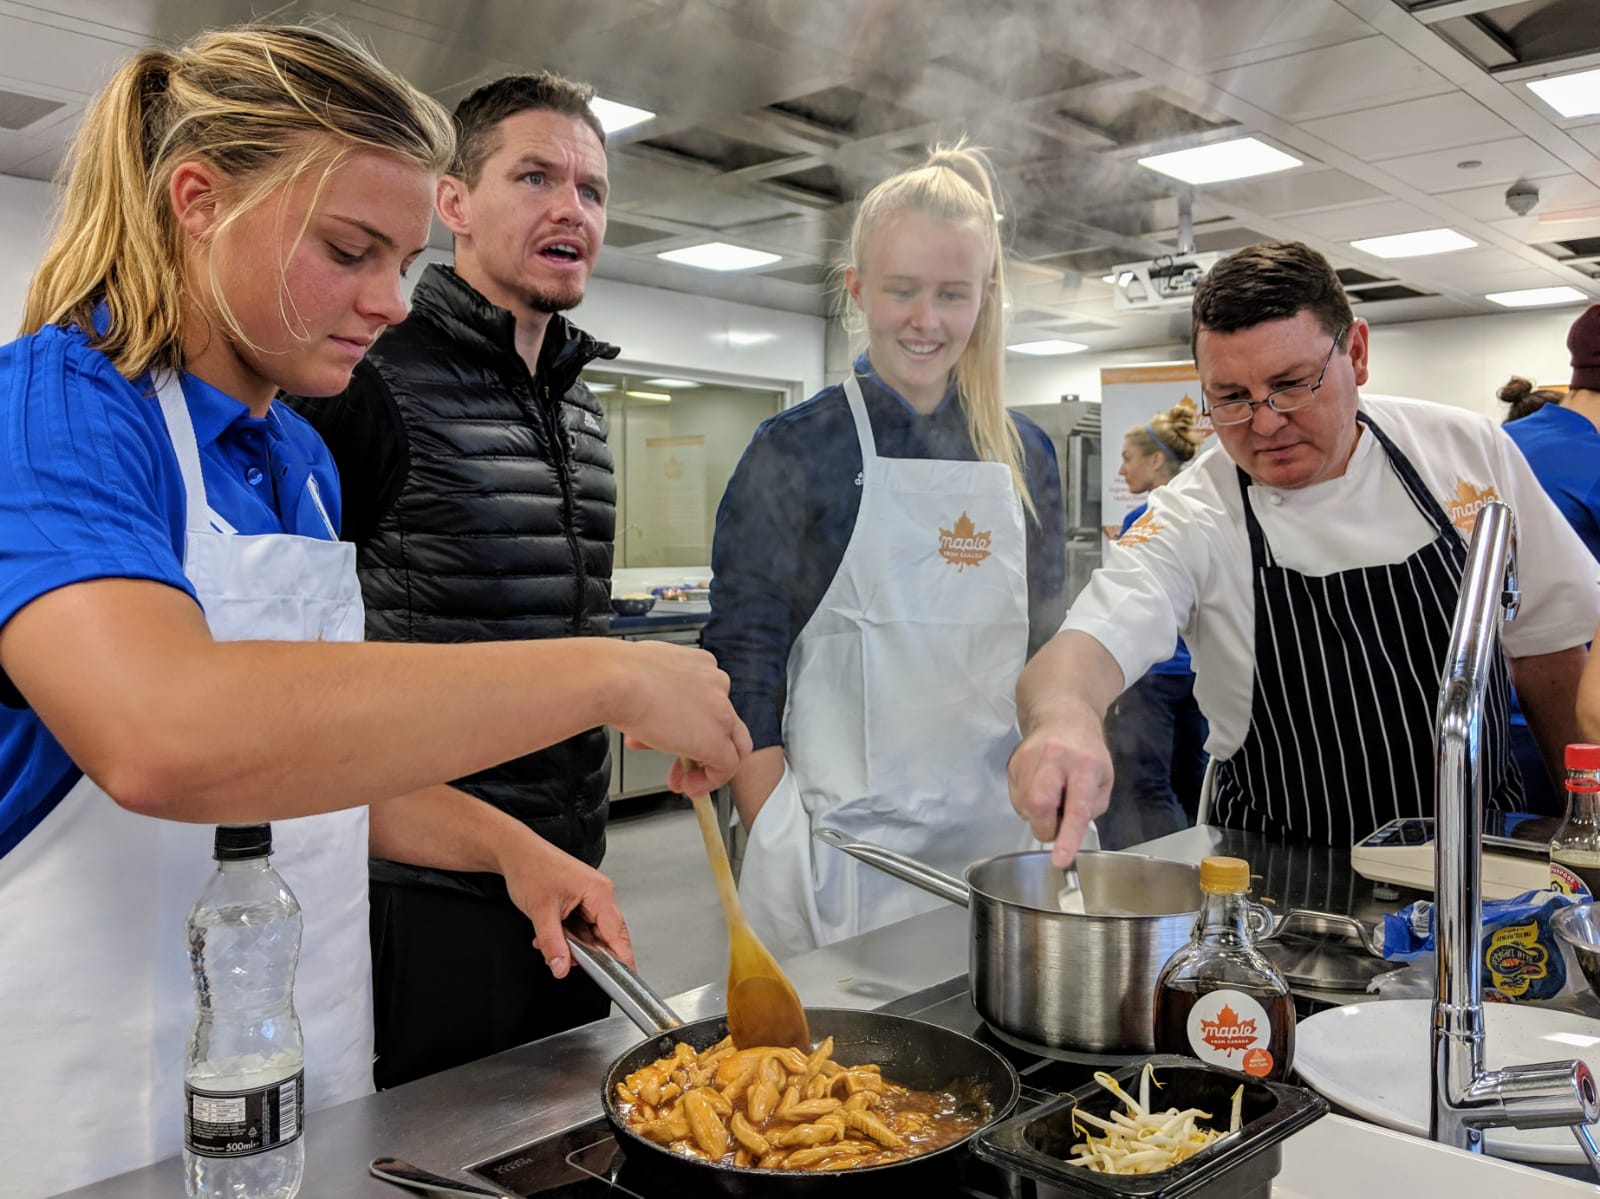 Birmingham City Ladies FC players using maple syrup in their cooking